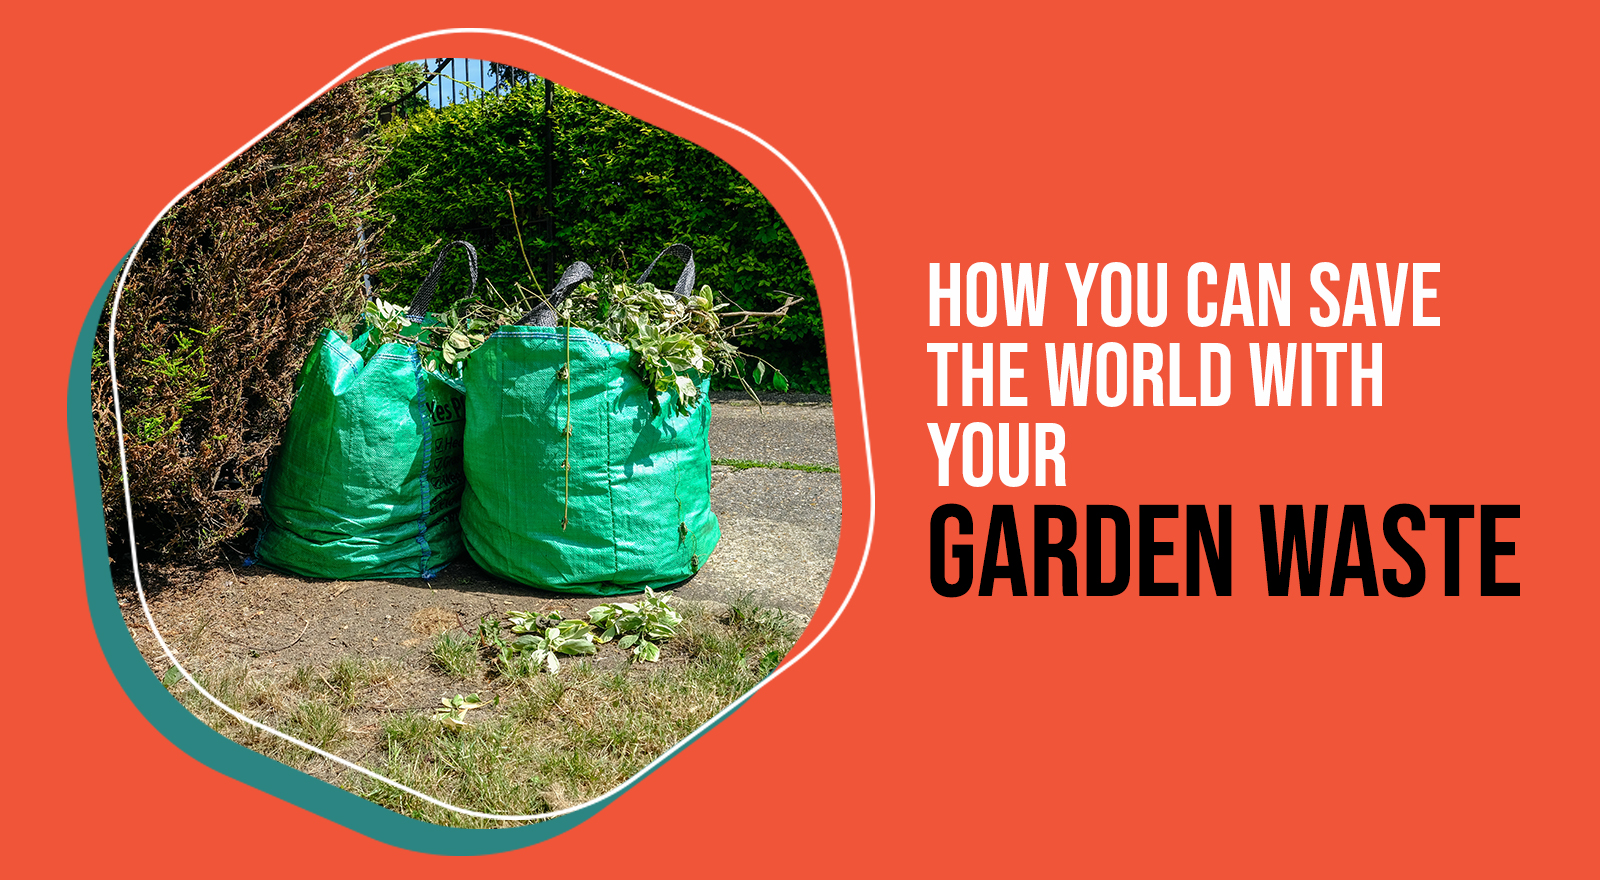 How you can save the world with your garden waste